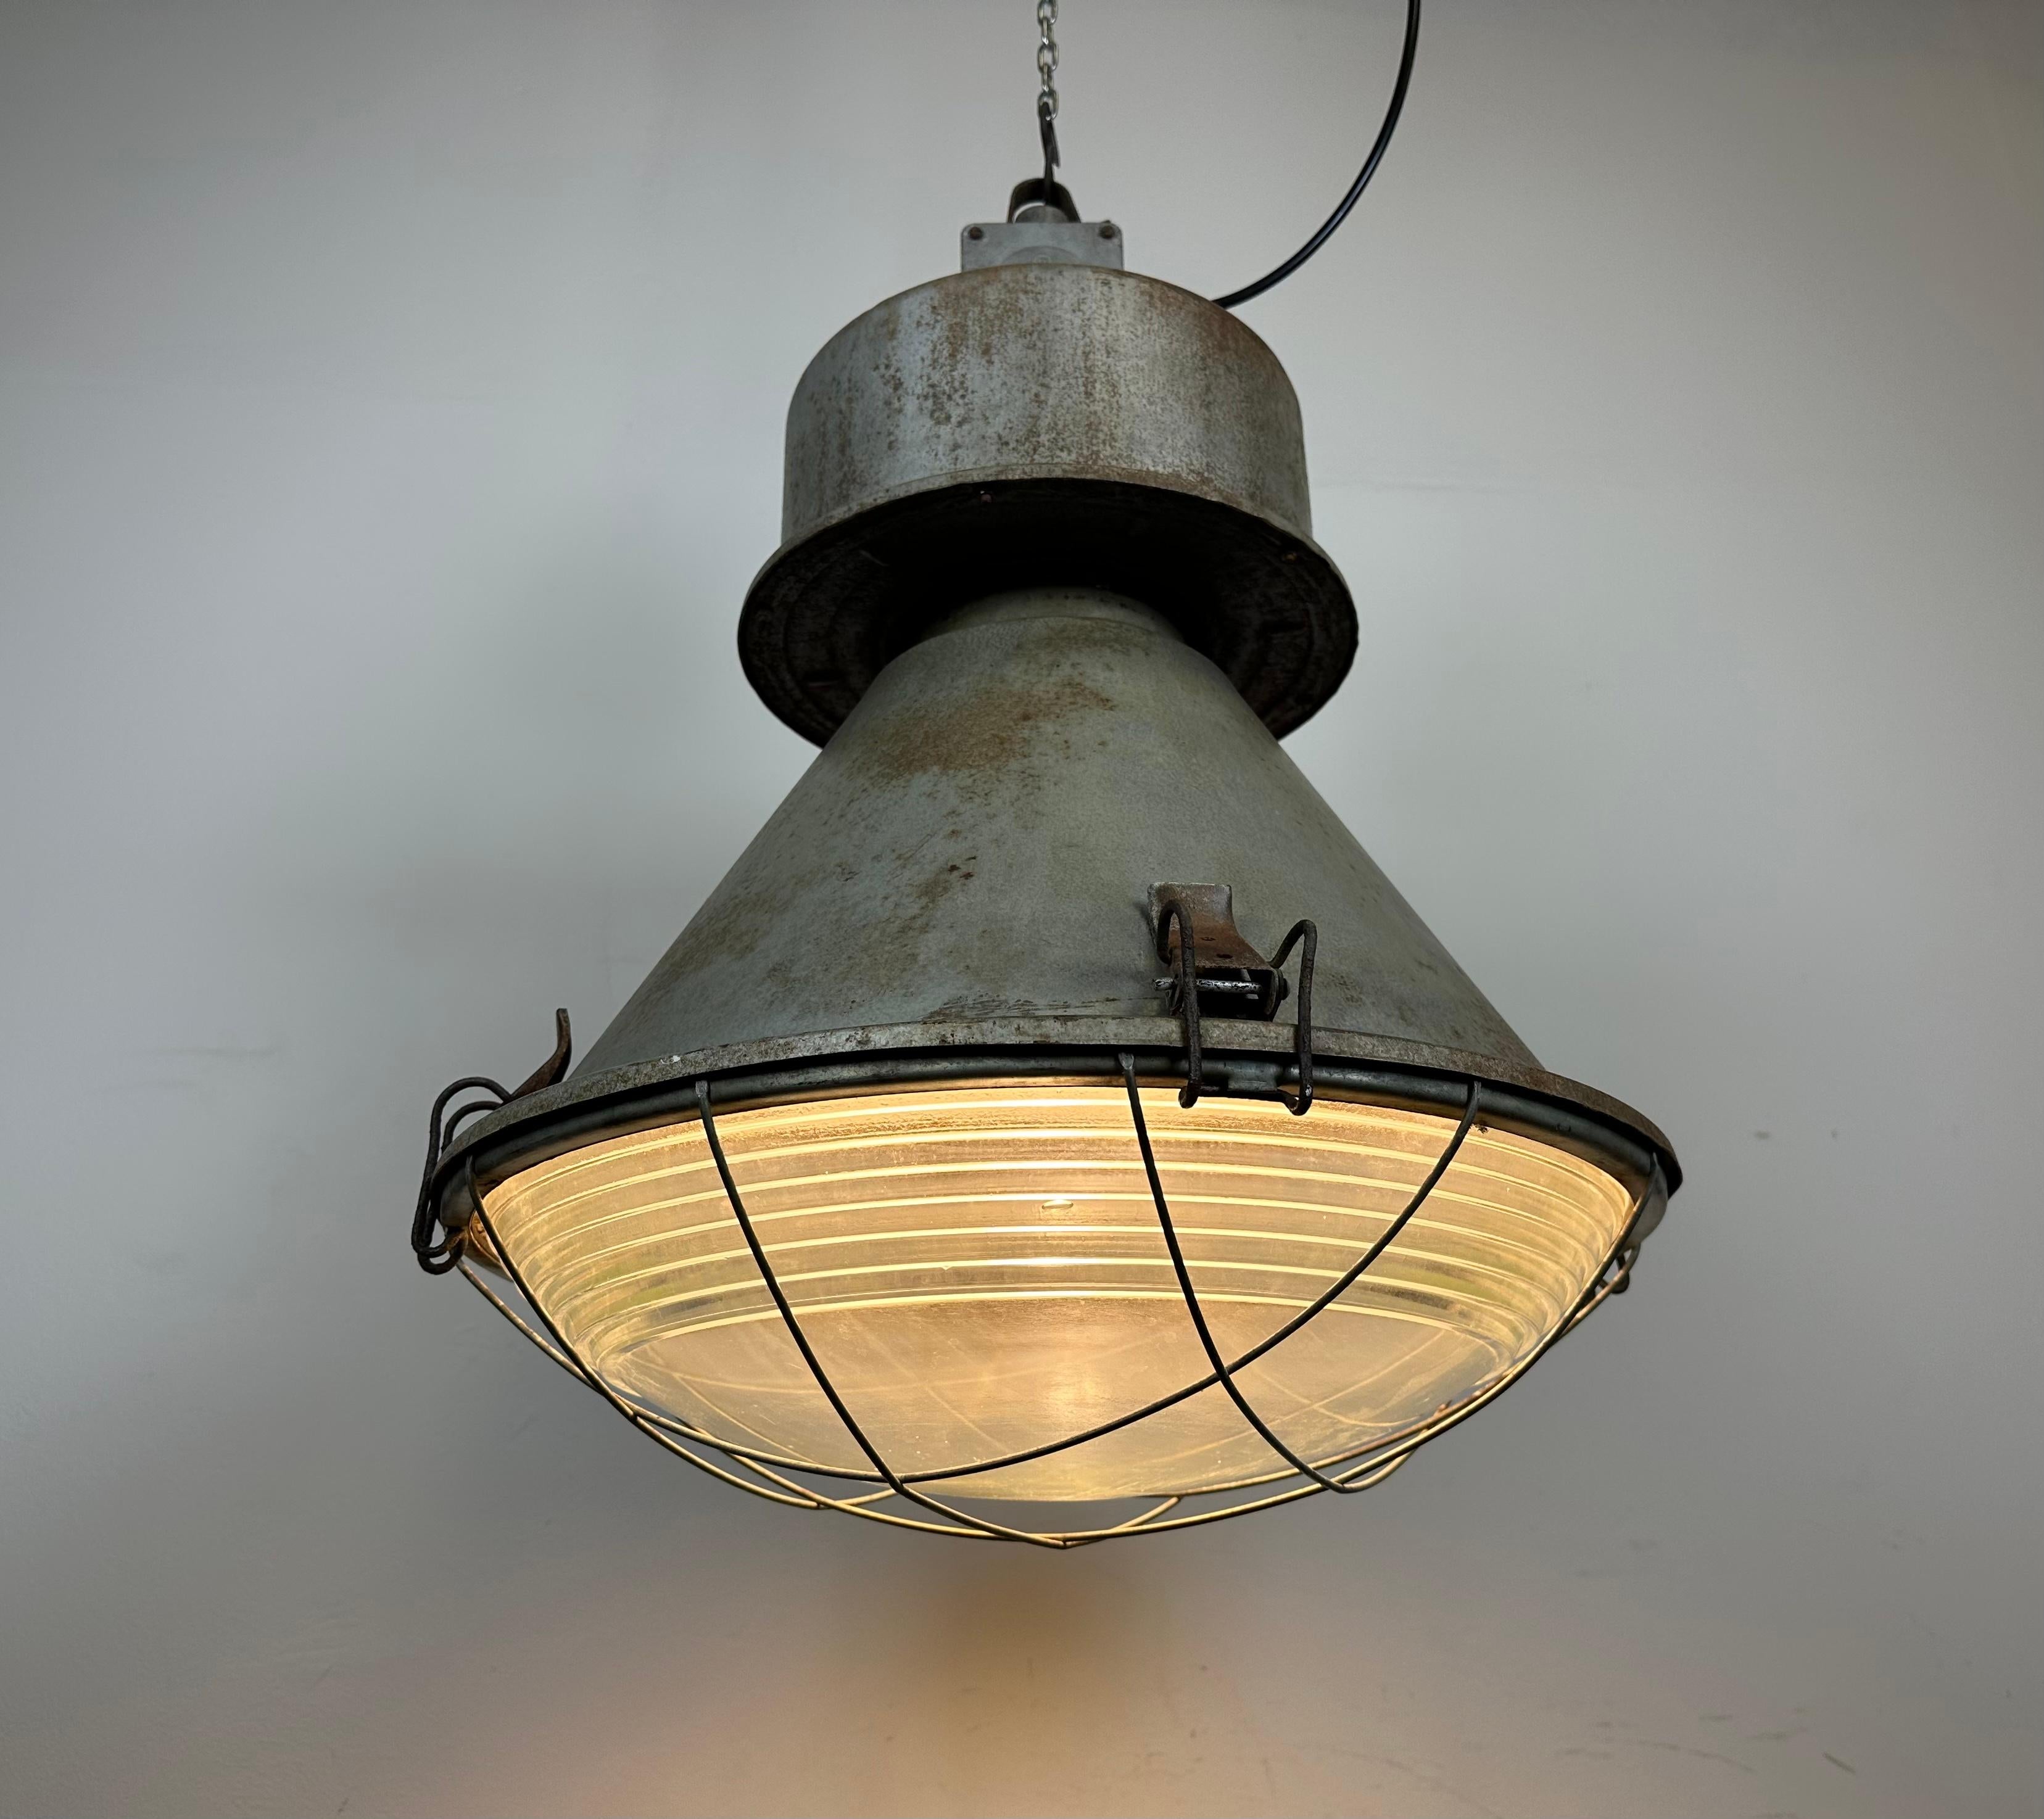 Industrial Polish Factory Pendant Lamp with Glass Cover from Mesko, 1970s For Sale 7